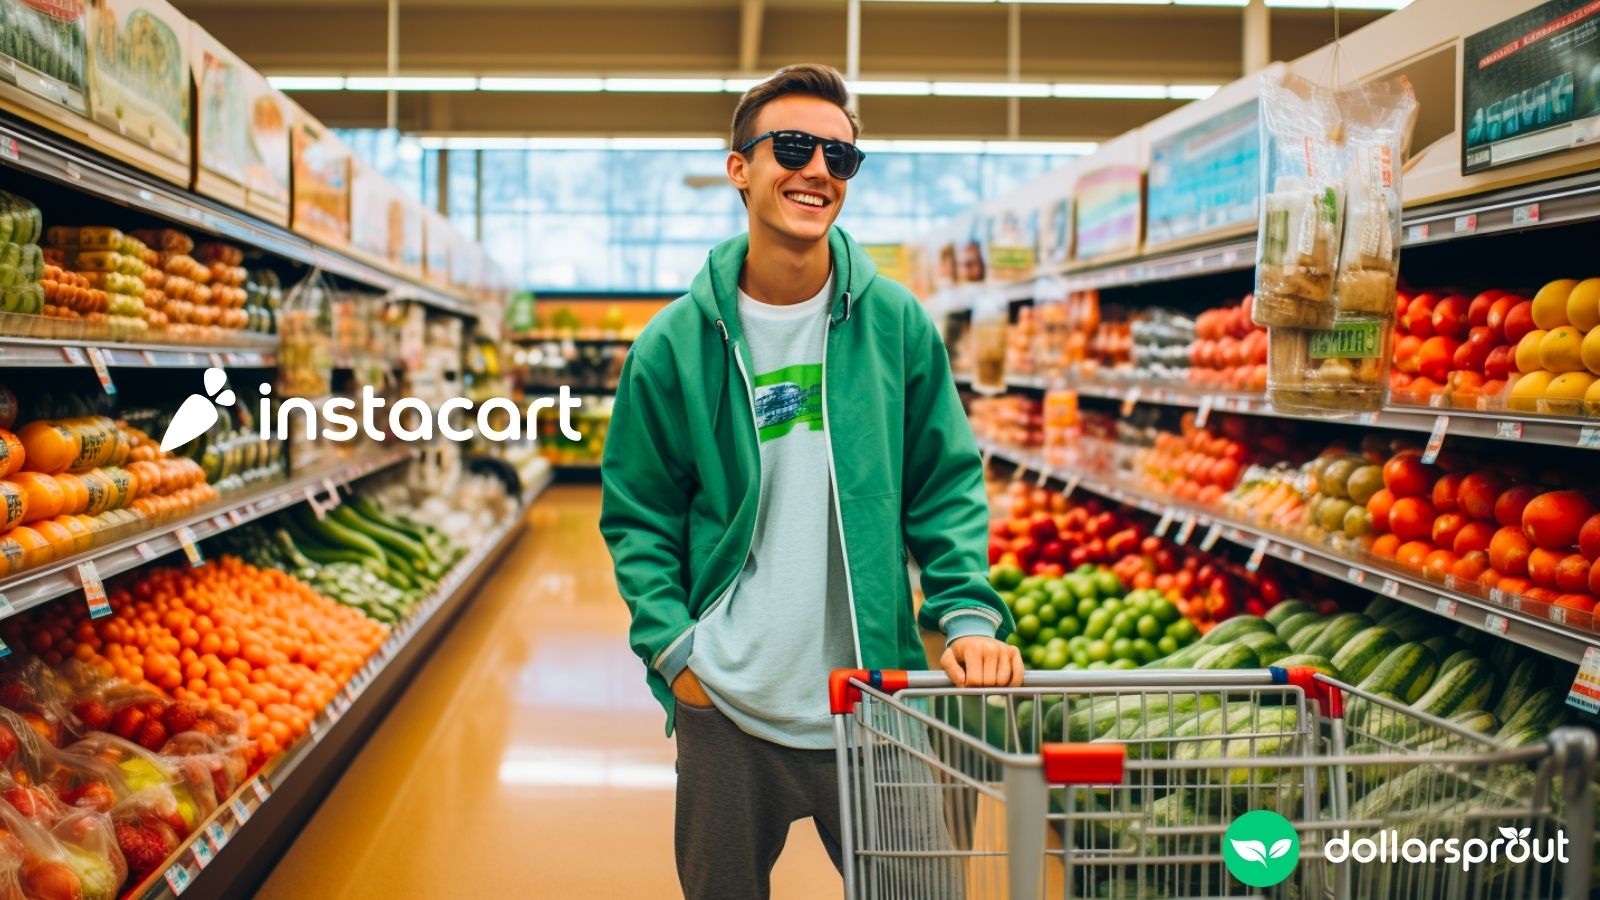 My side hustle is being an Instacart shopper - and it earns me